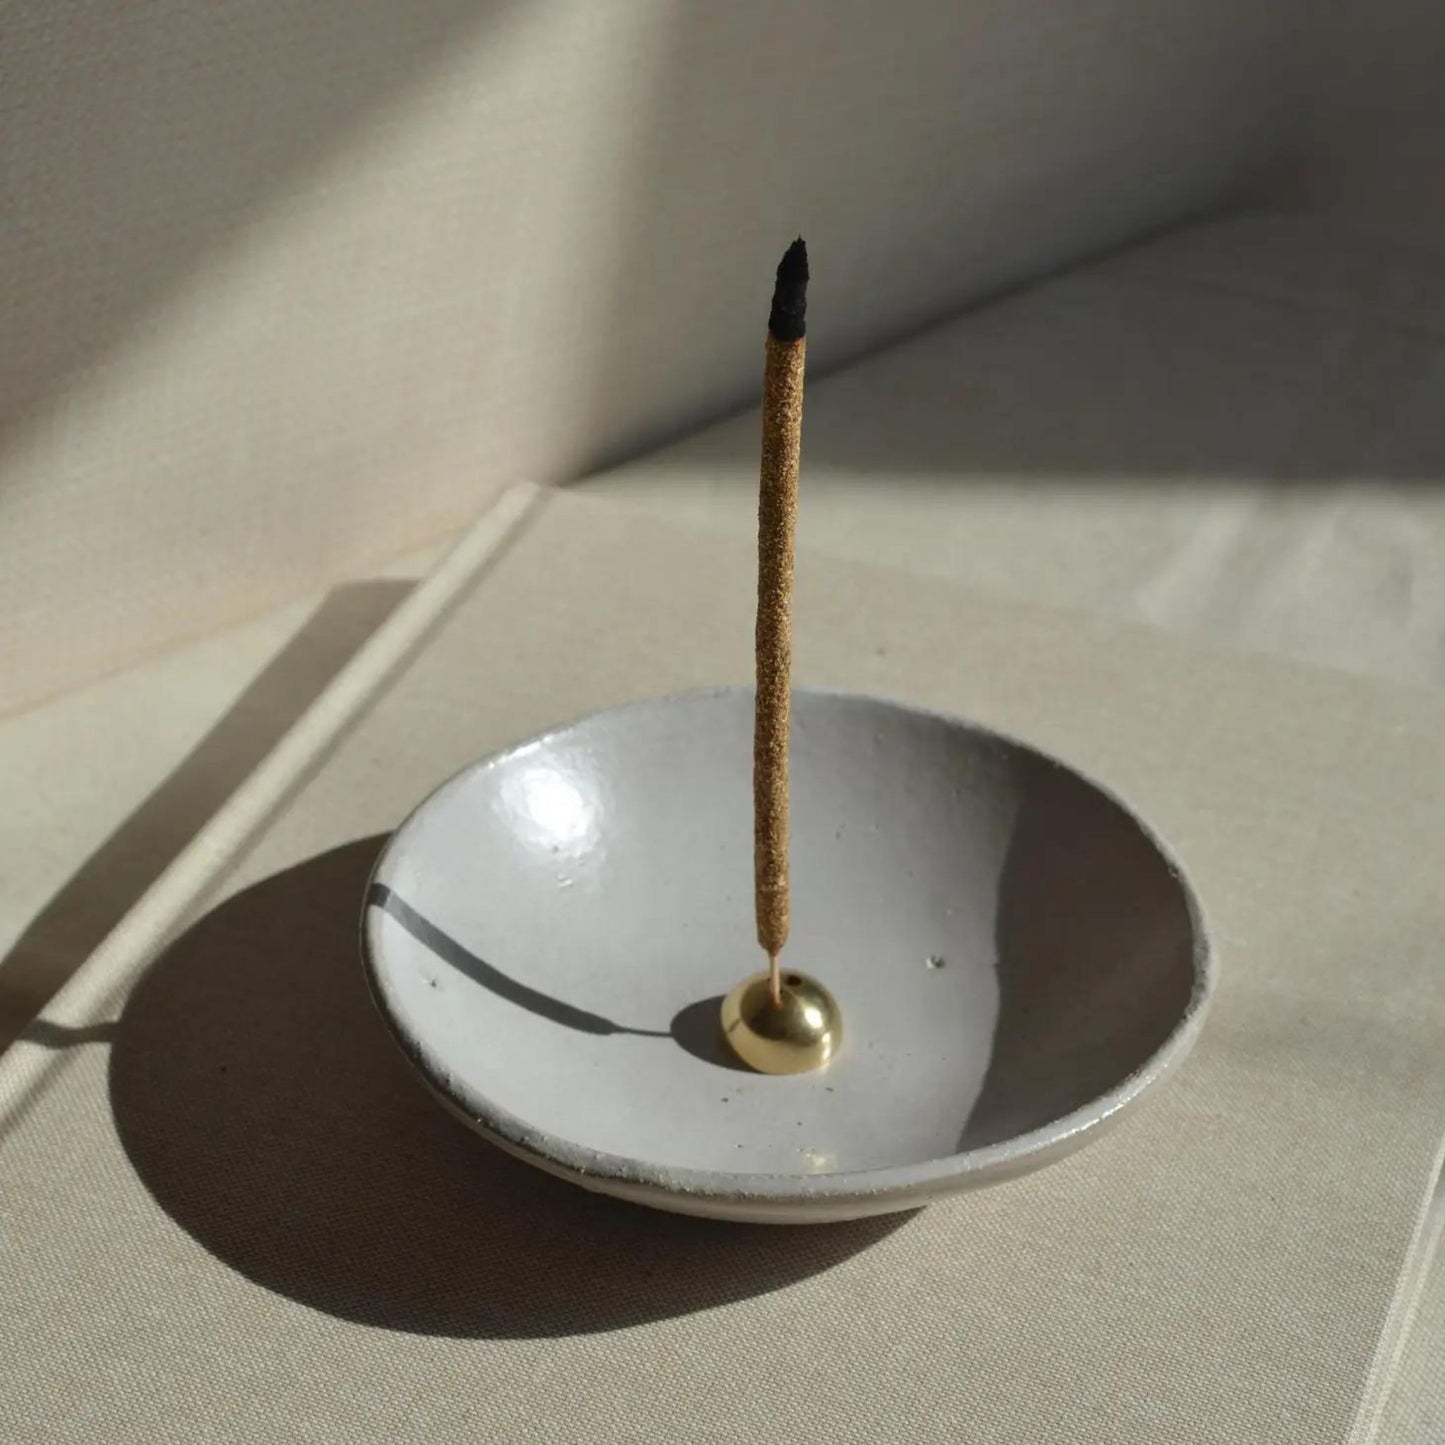 Brass Arch Incense Holder in a ceramic bowl to catch the burned pieces of the incense stick.